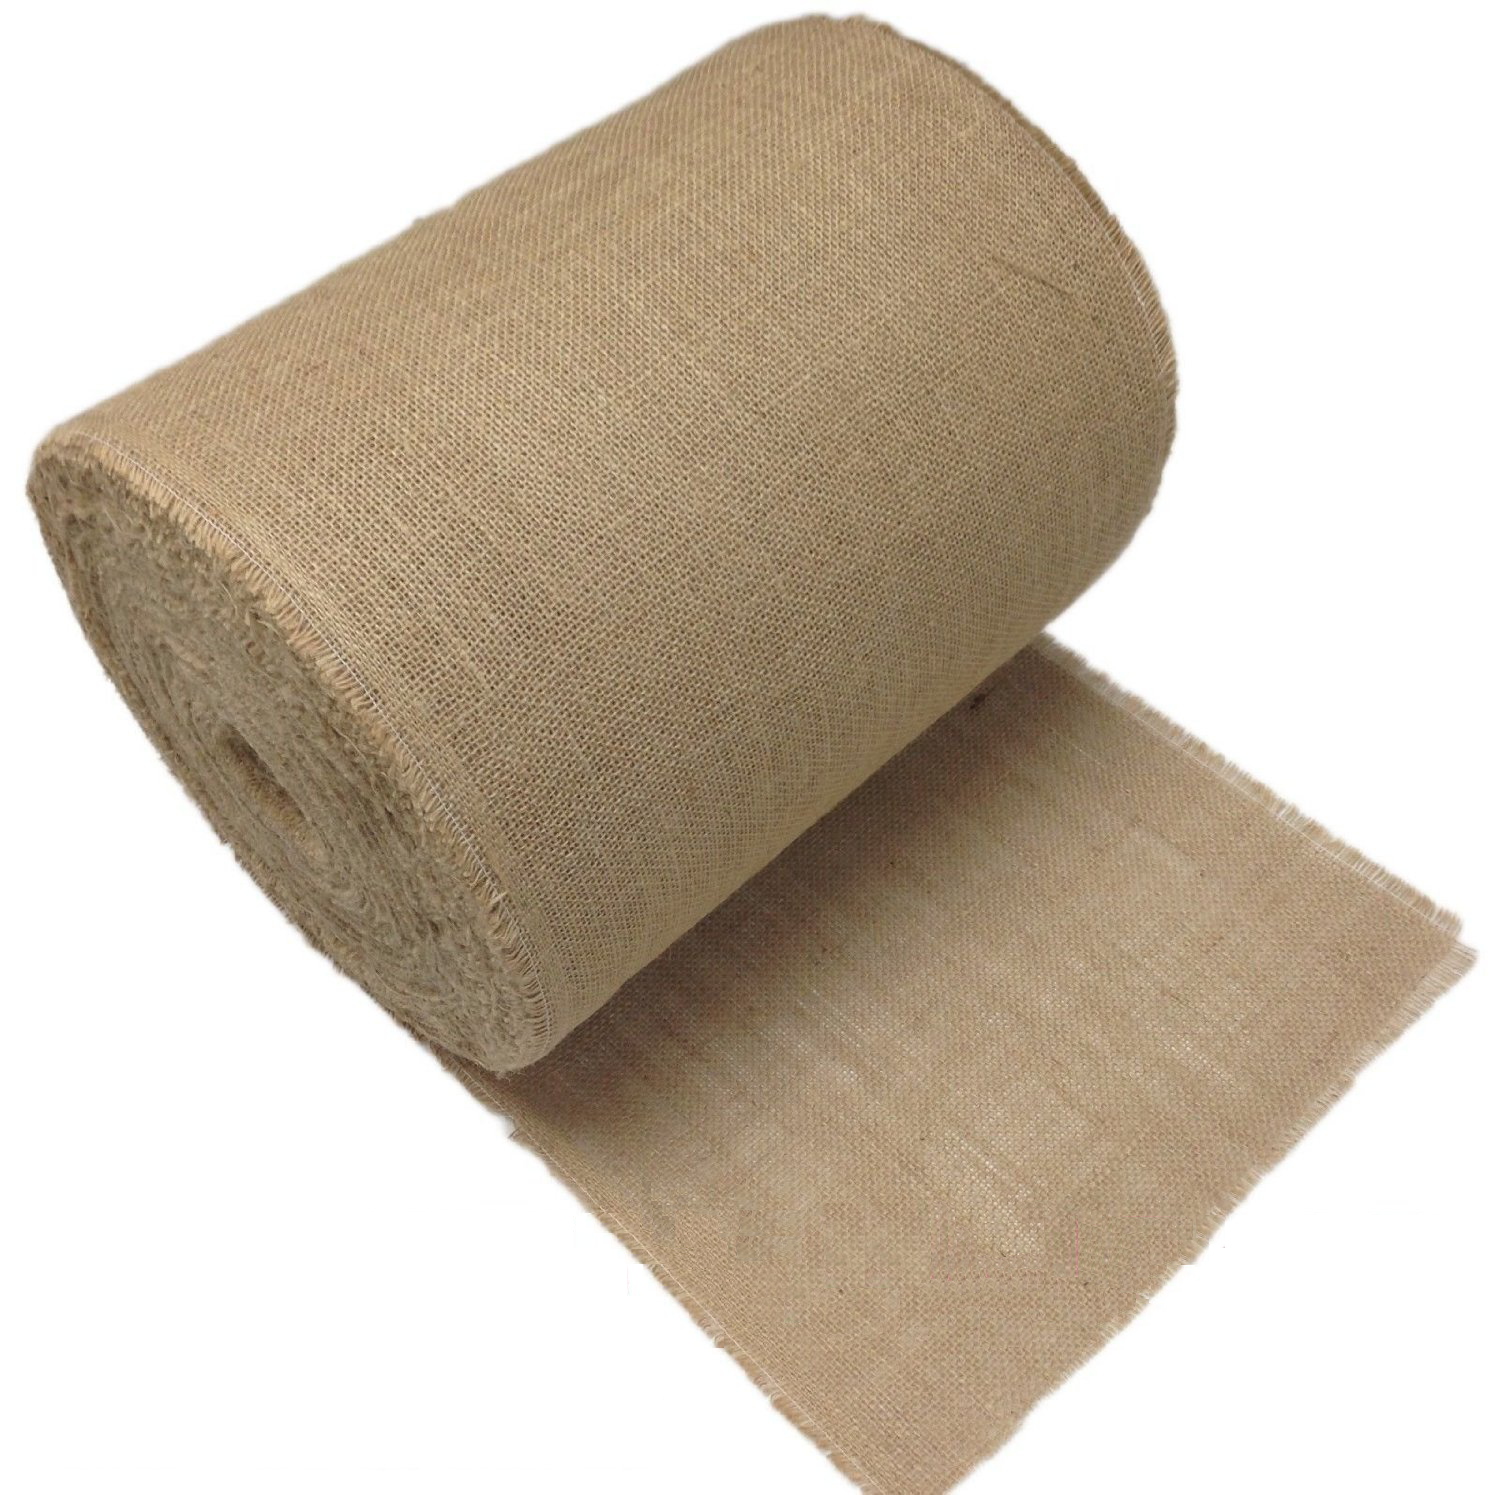 14" Burlap Roll Sewn with Frayed edges - 100 Yards